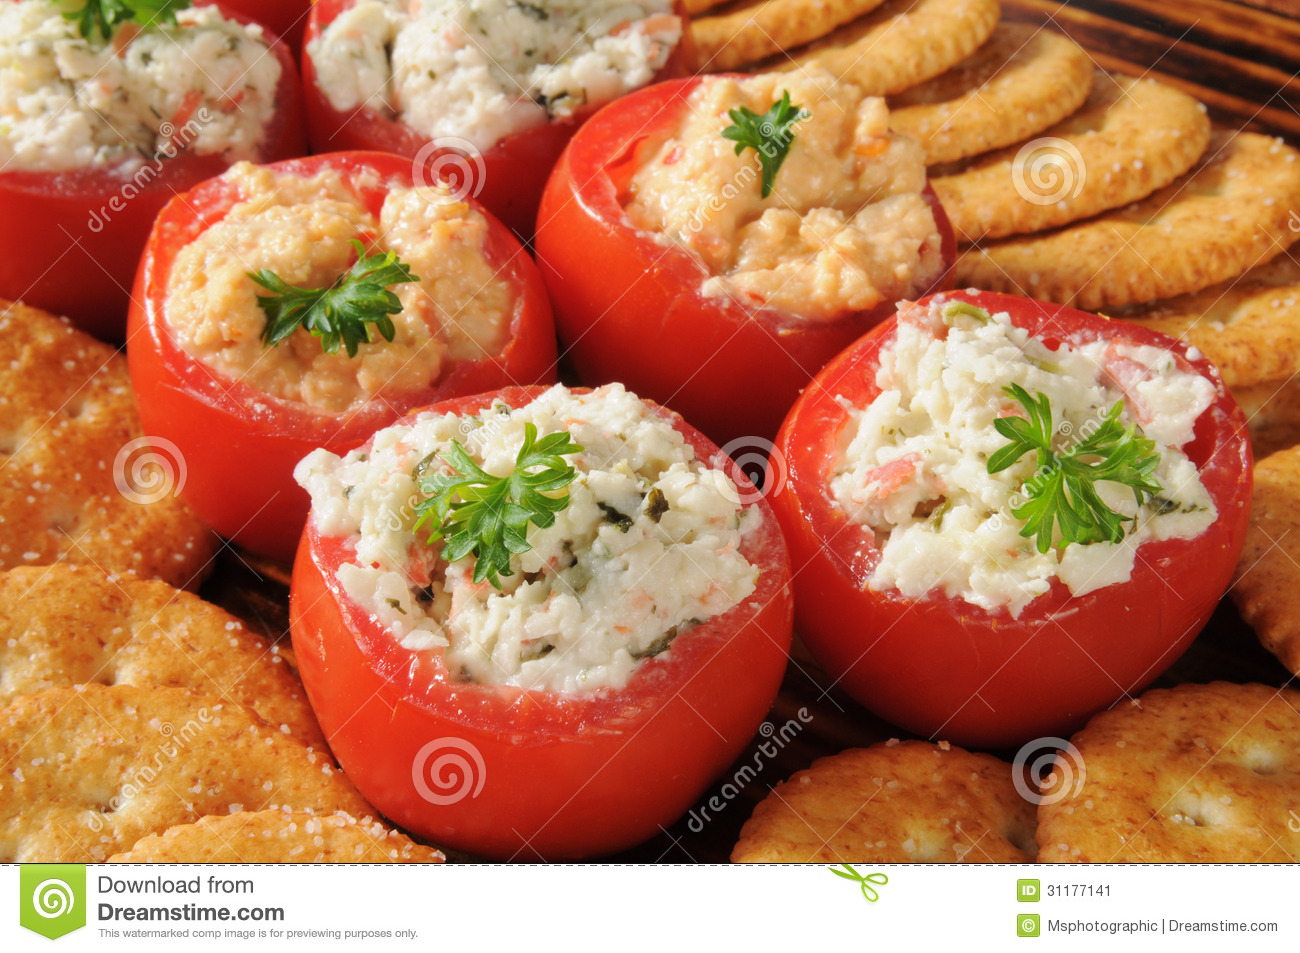 Stuffed Tomatoes And Crackers Stock Image   Image  31177141